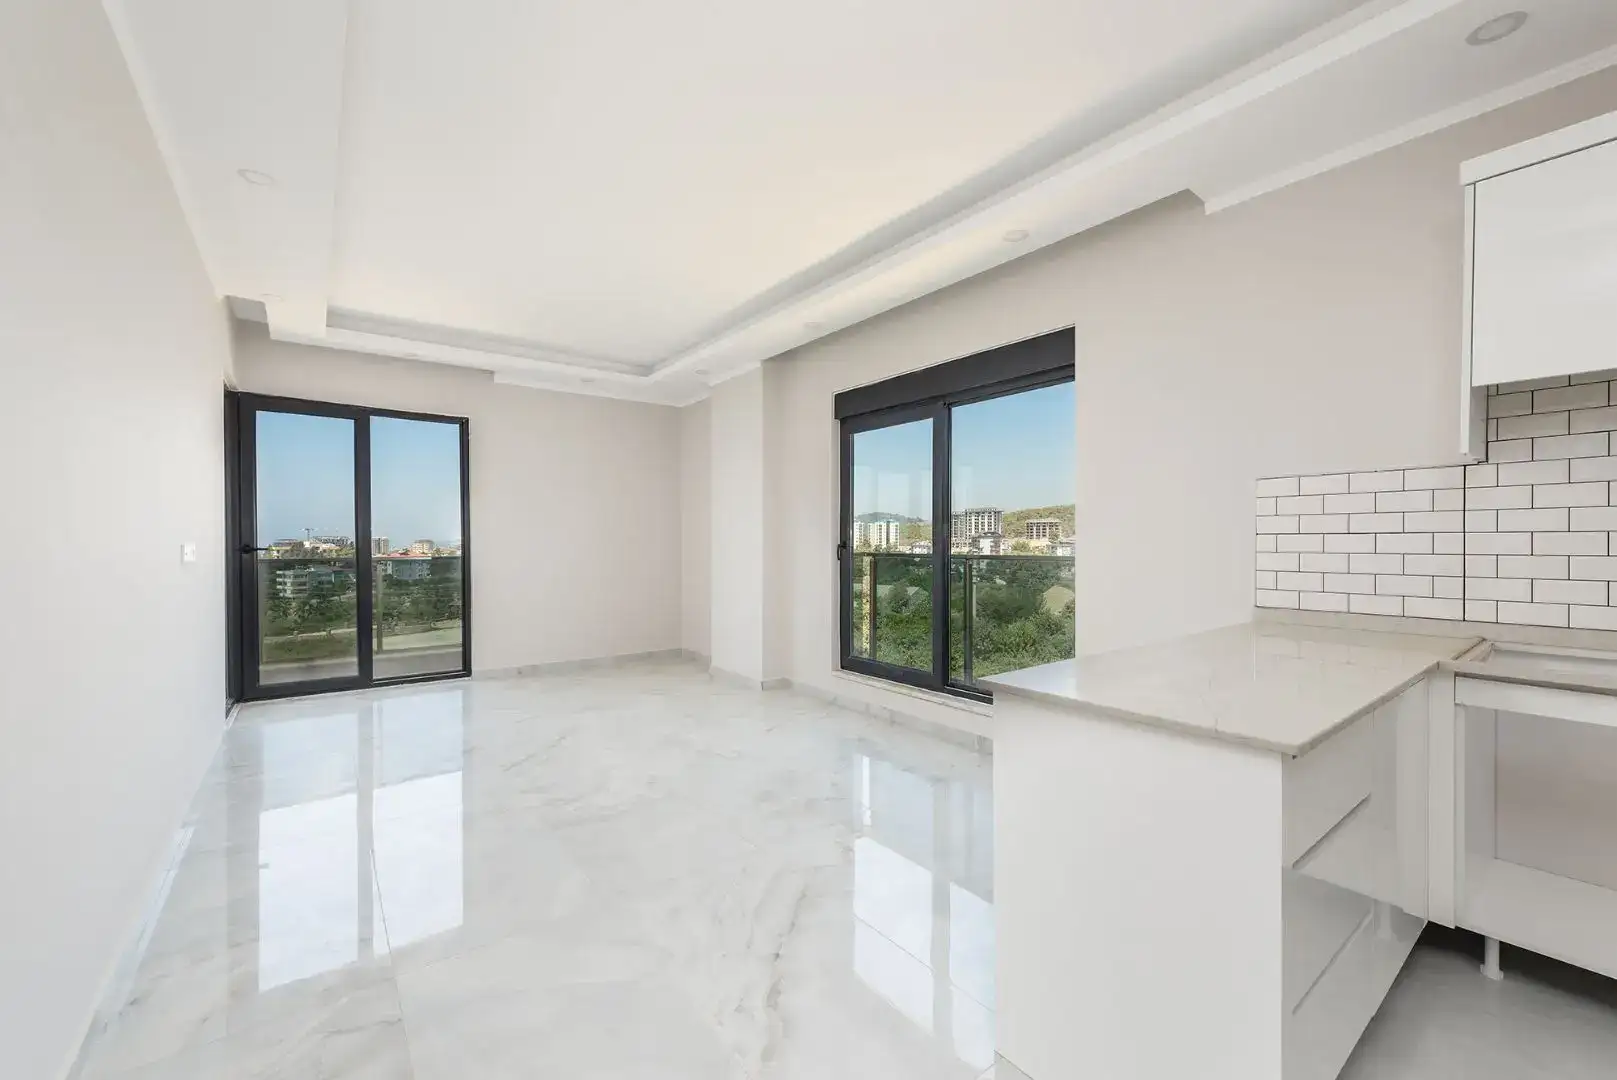 UNFURNISHED 1 + 1 FLAT İN NEWLY FINISHED BUILDING IN AVSALLAR